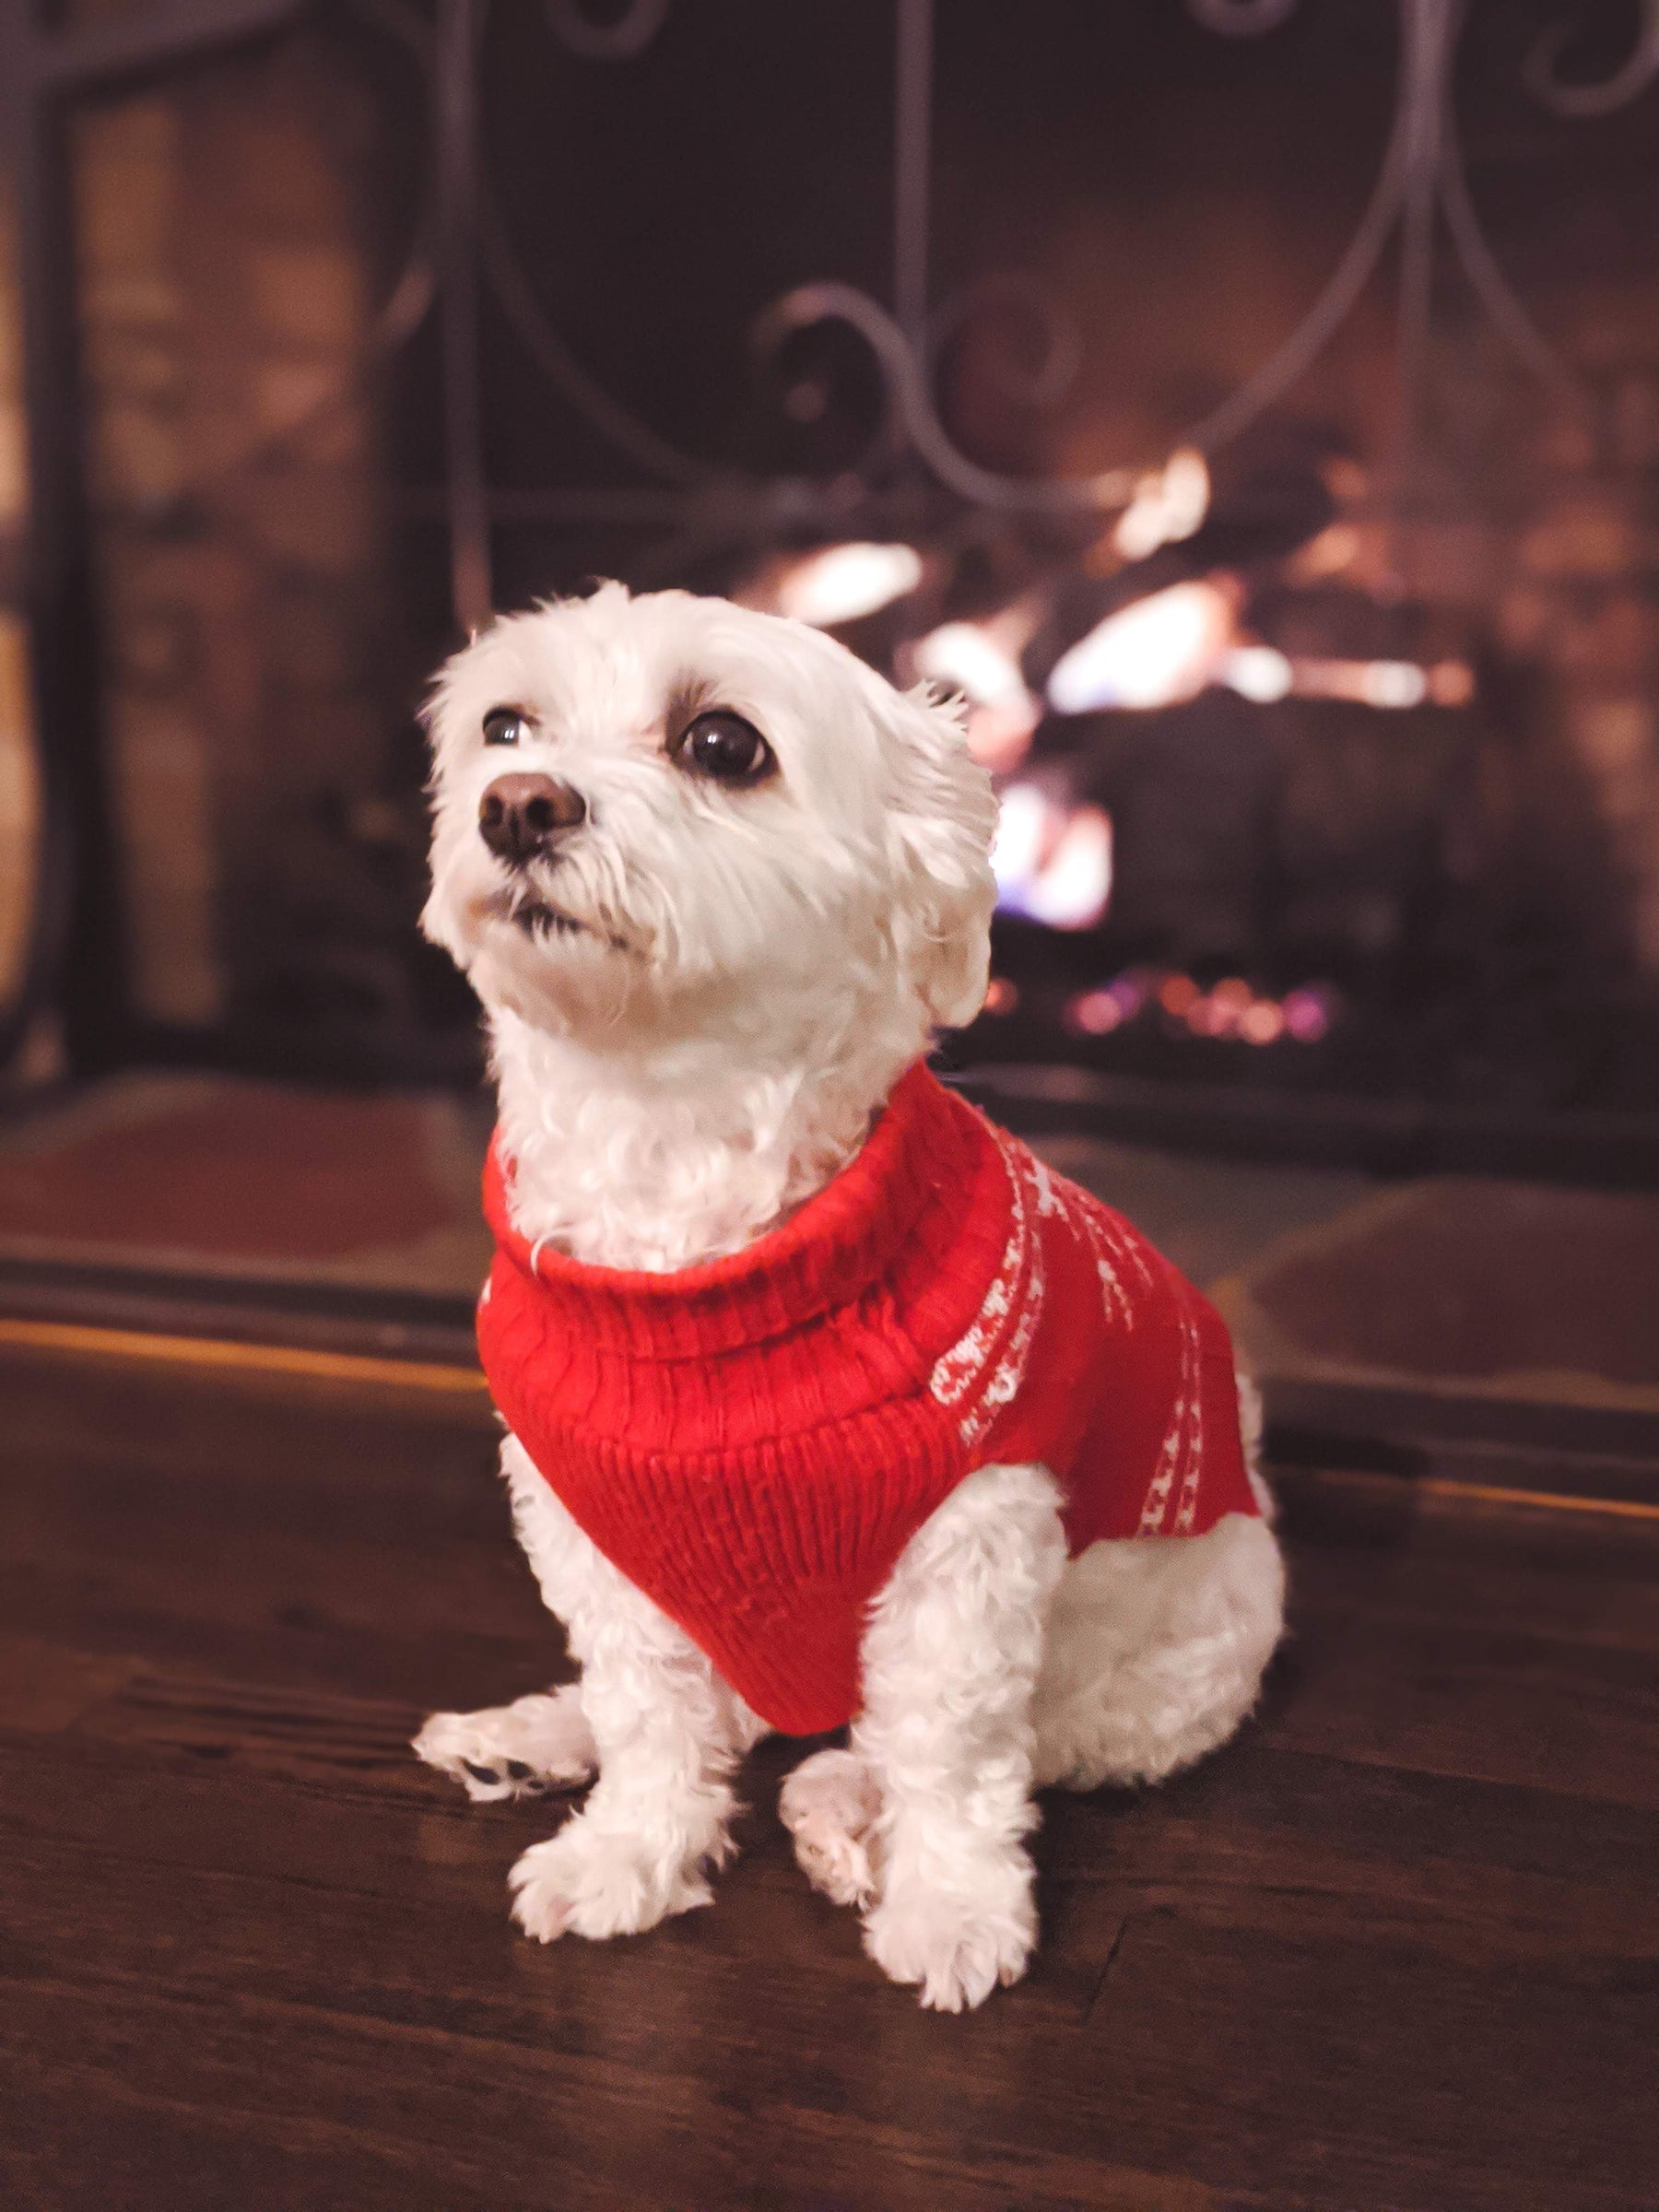 Does Your Dog Need A Sweater Or Jacket?